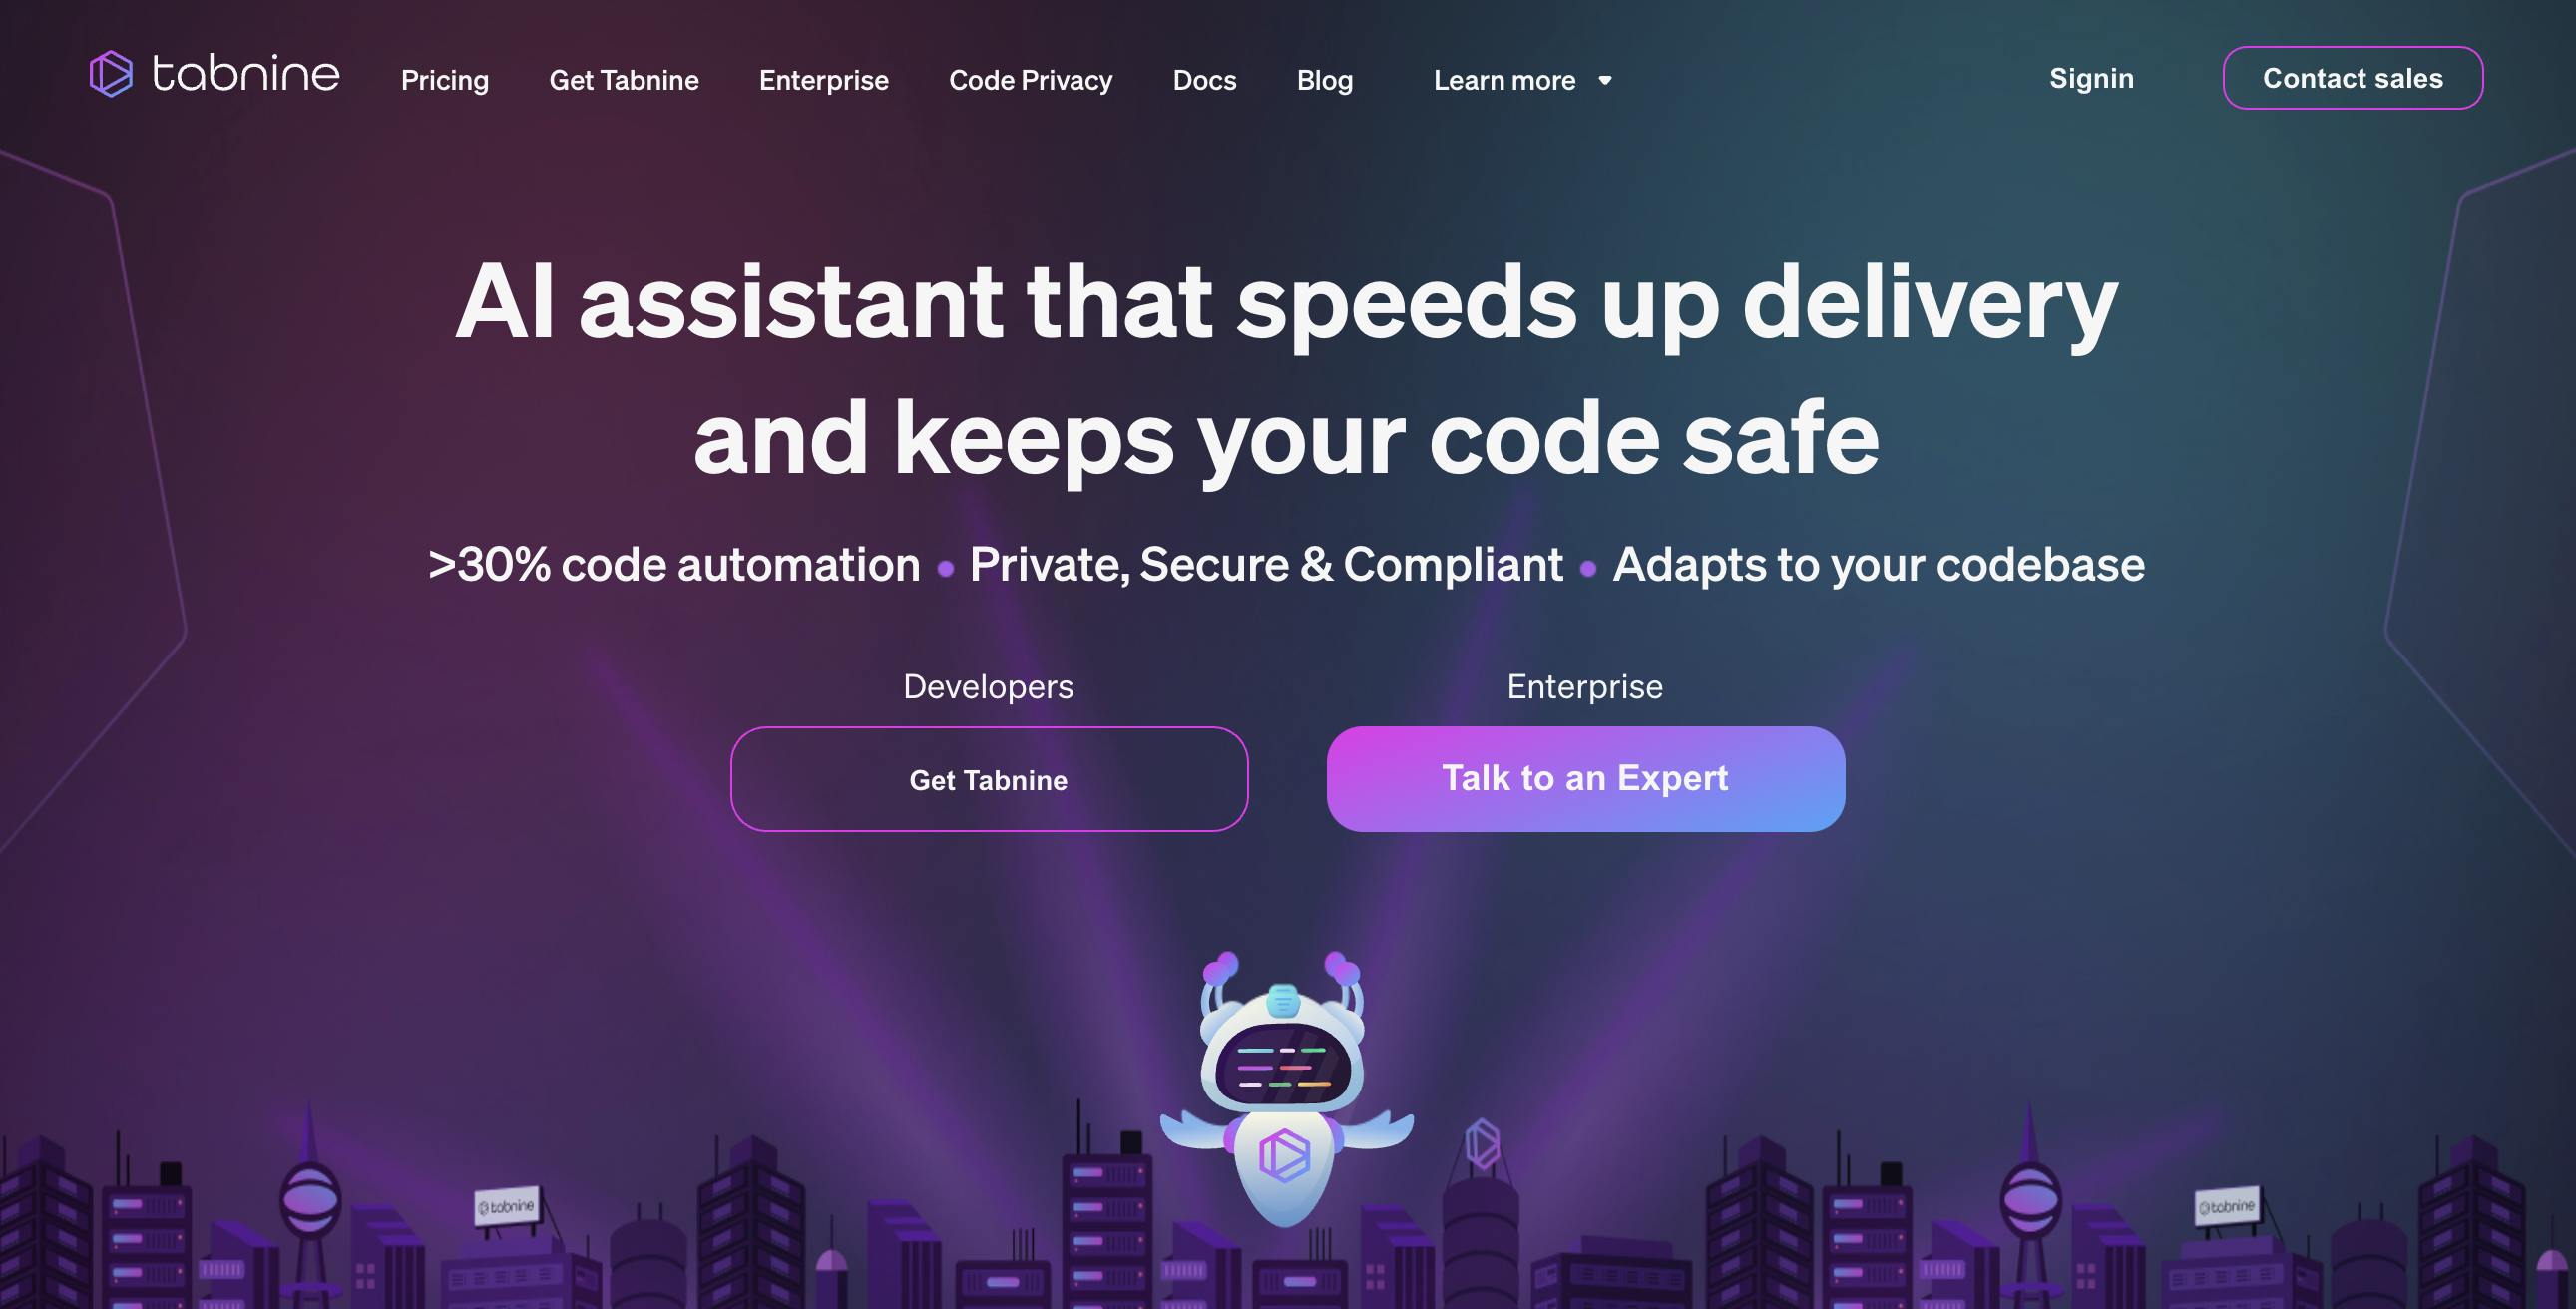 Tabnine- AI assistant that speeds up delivery and keeps your code safe